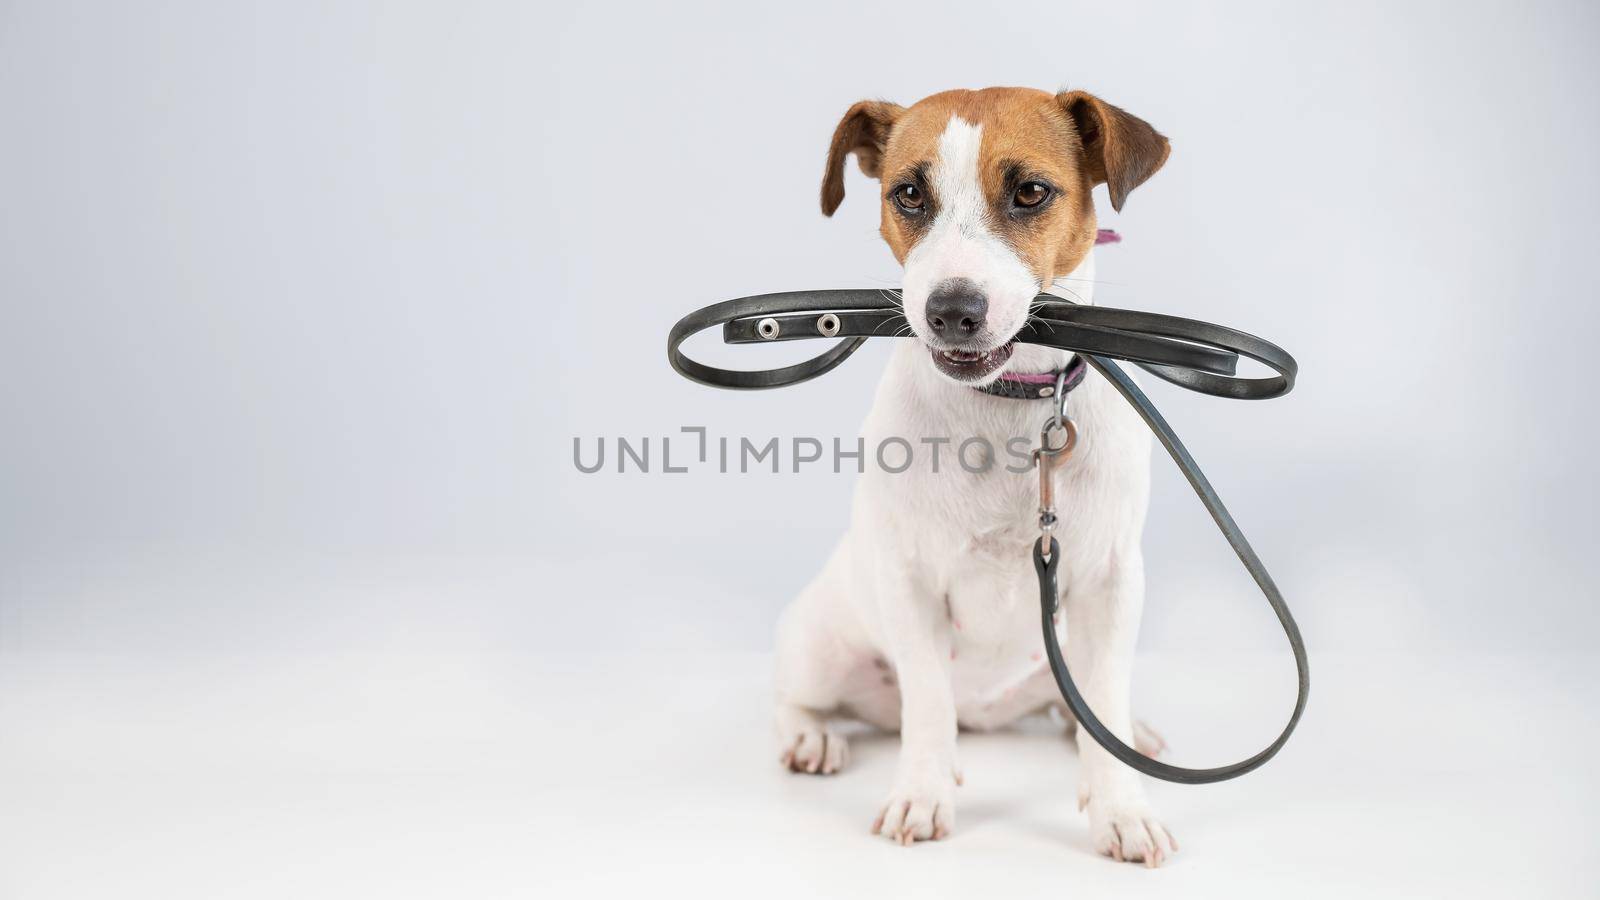 Jack russell terrier dog holding a leash on a white background. by mrwed54